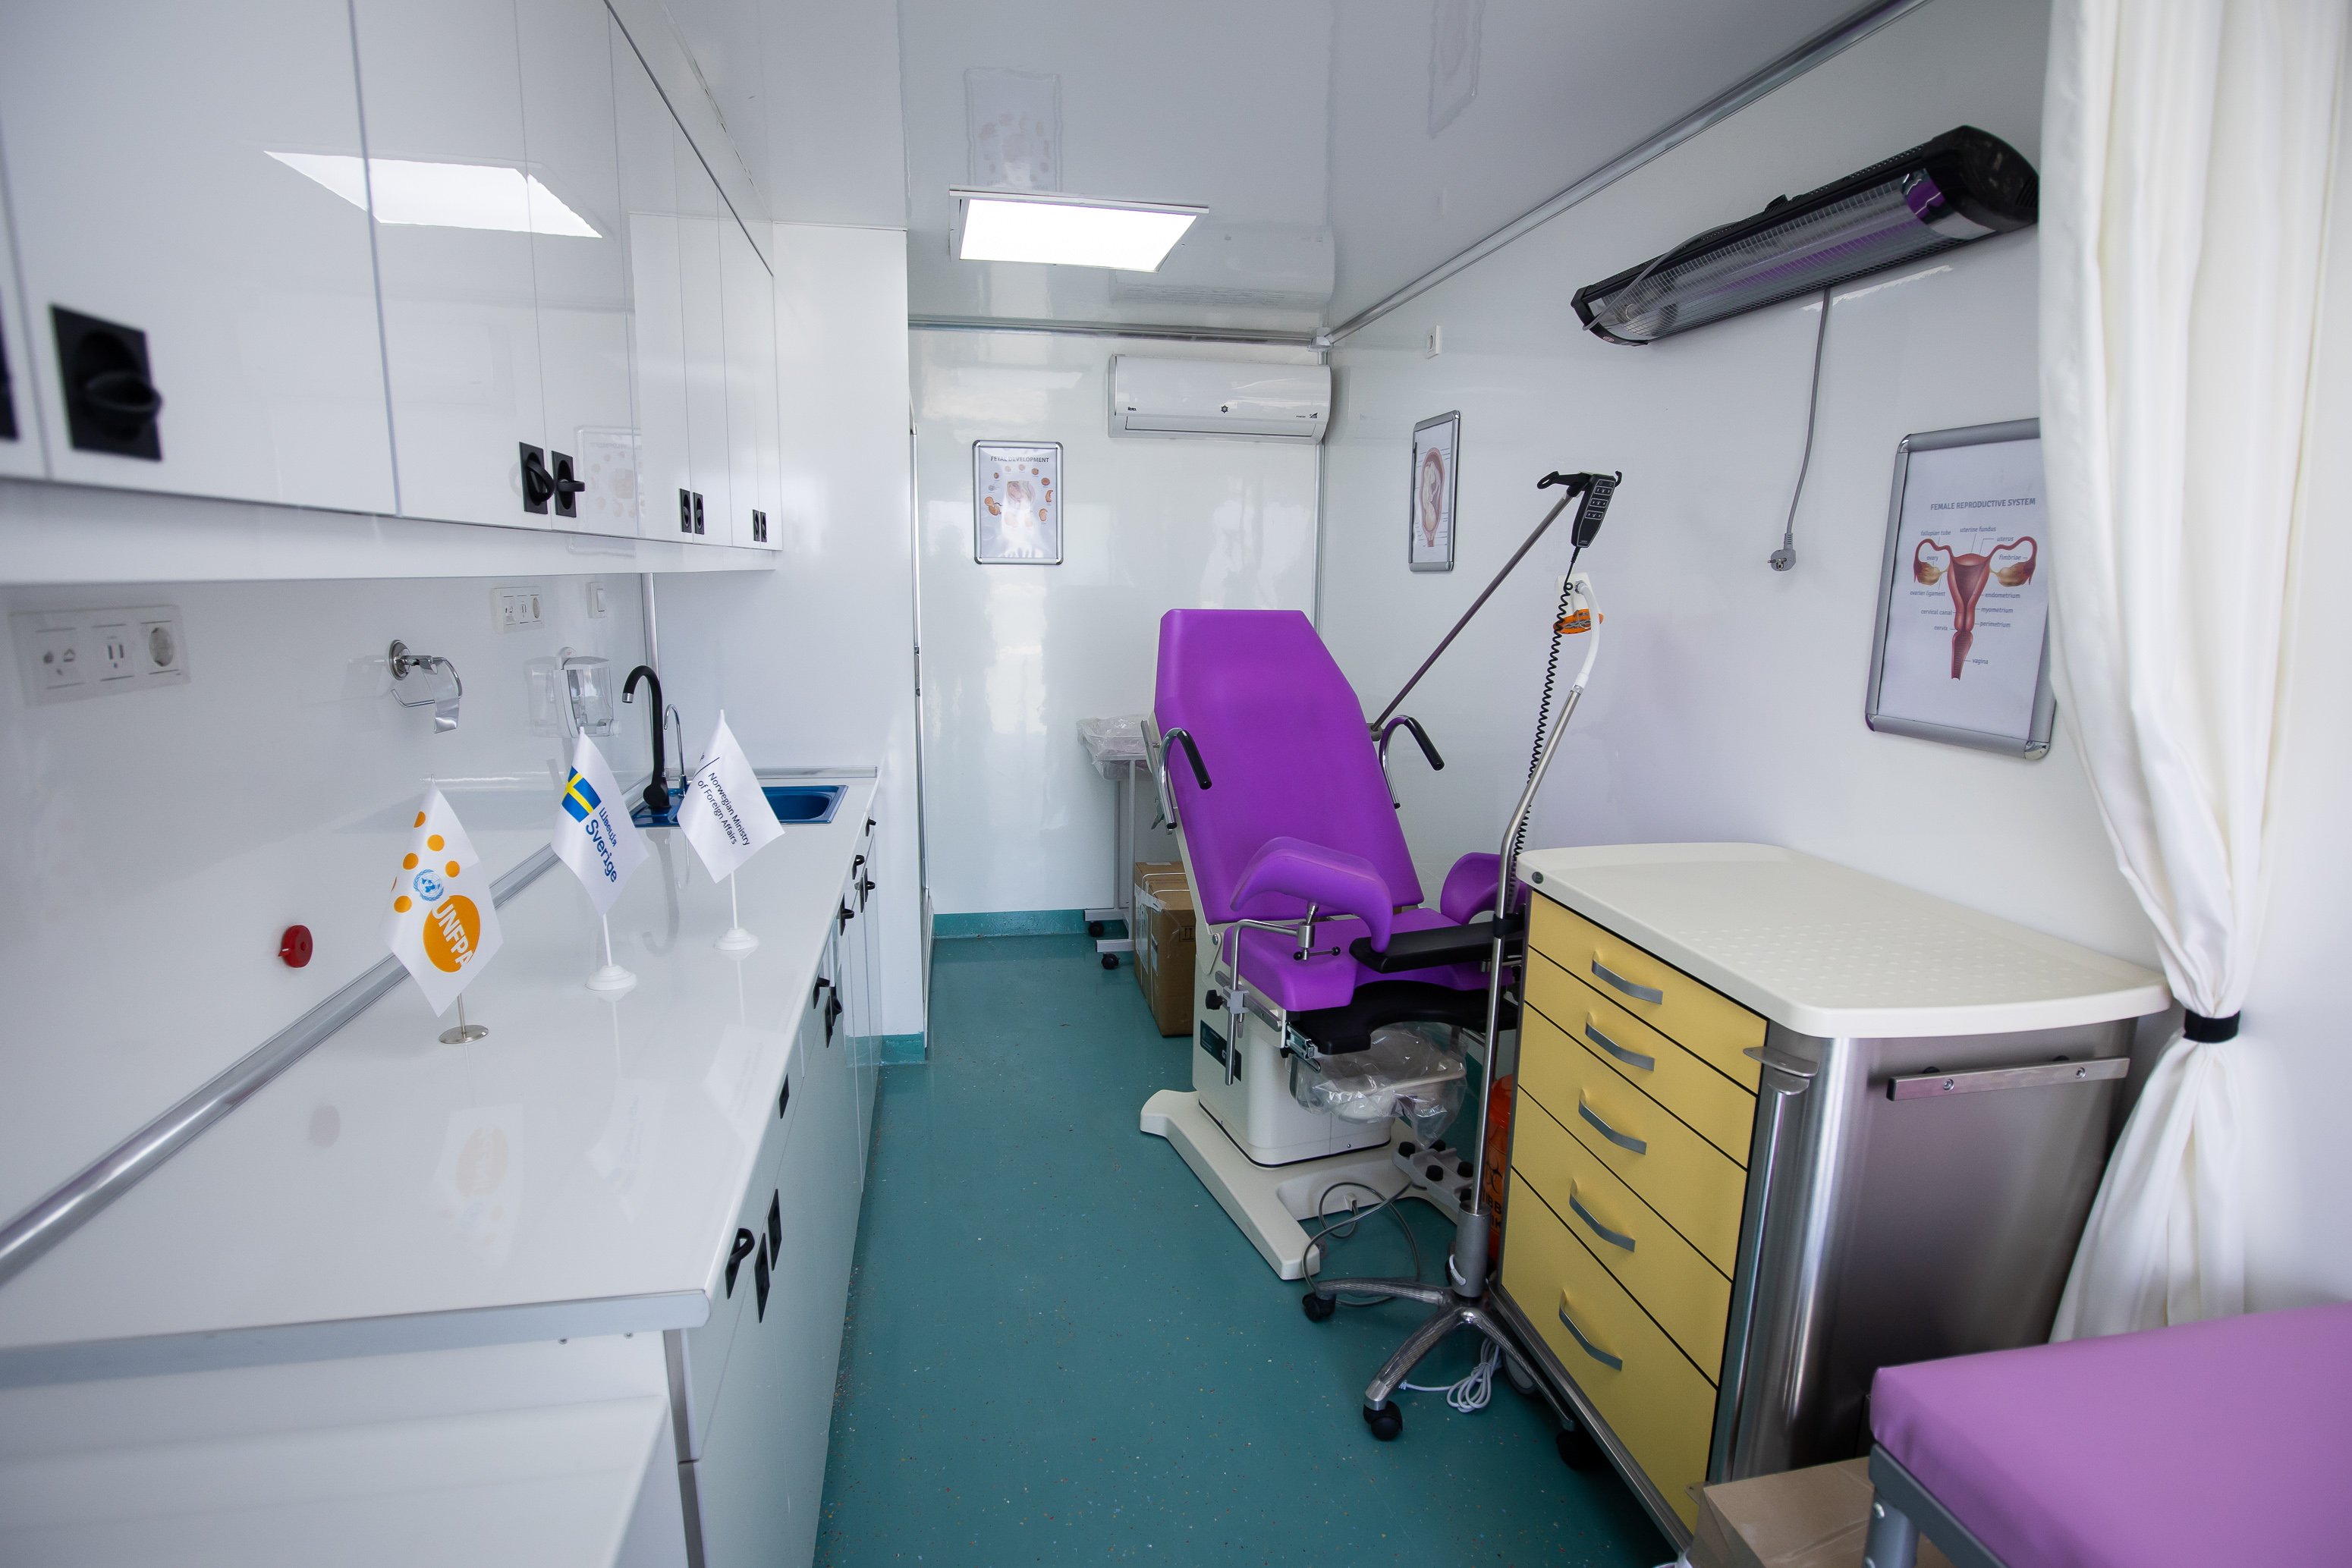 The inside of the mobile gynaecological clinic